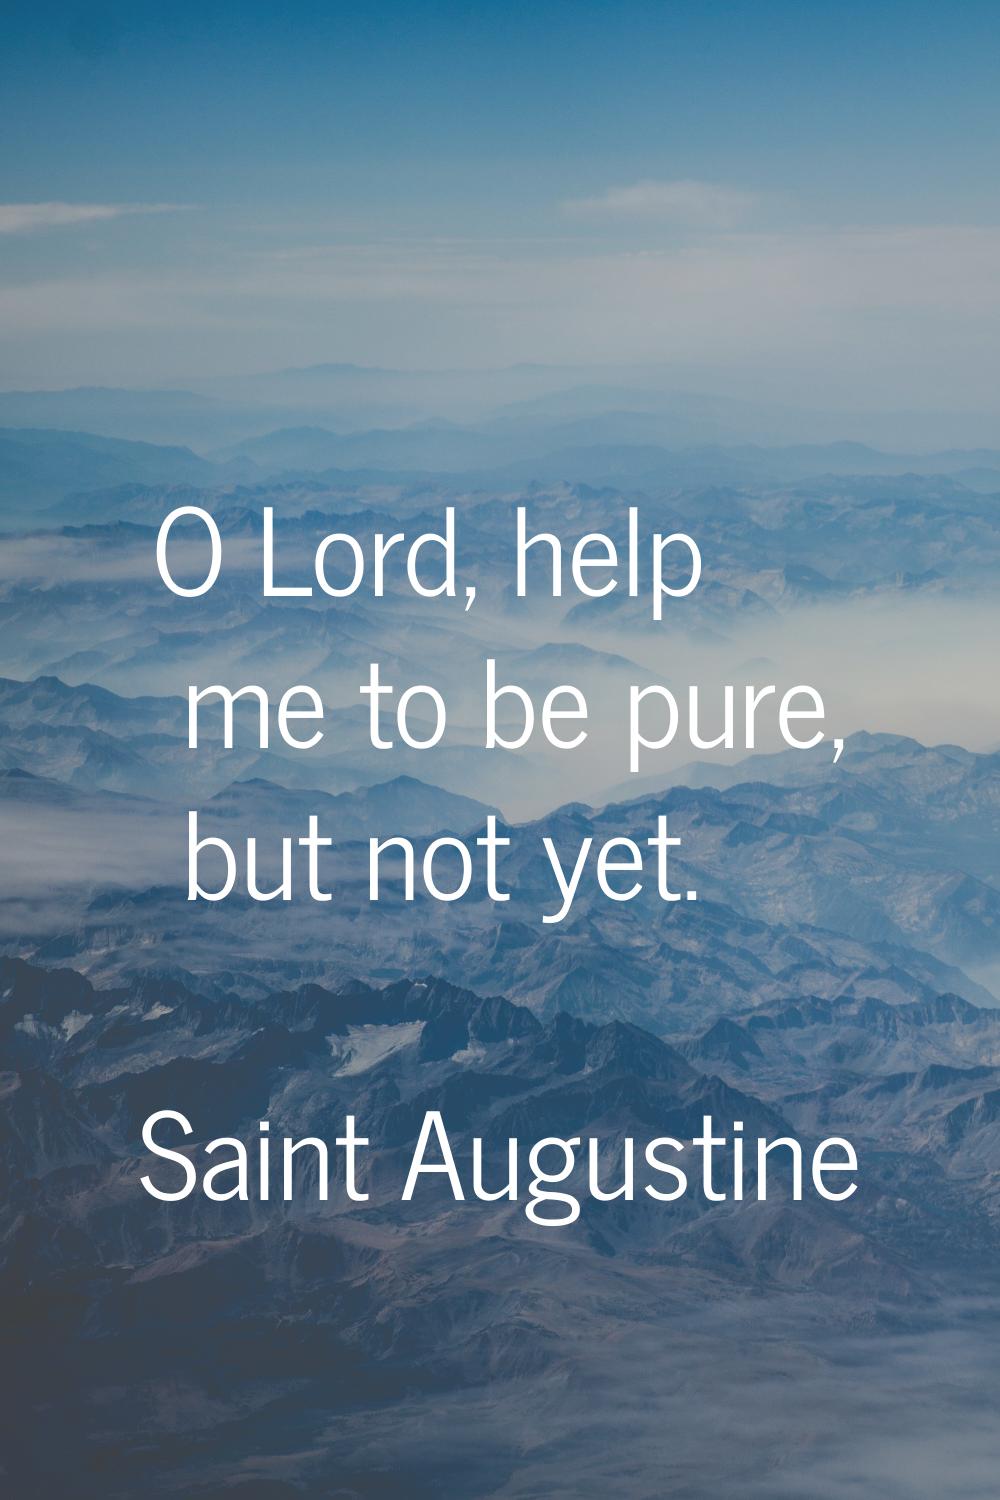 O Lord, help me to be pure, but not yet.